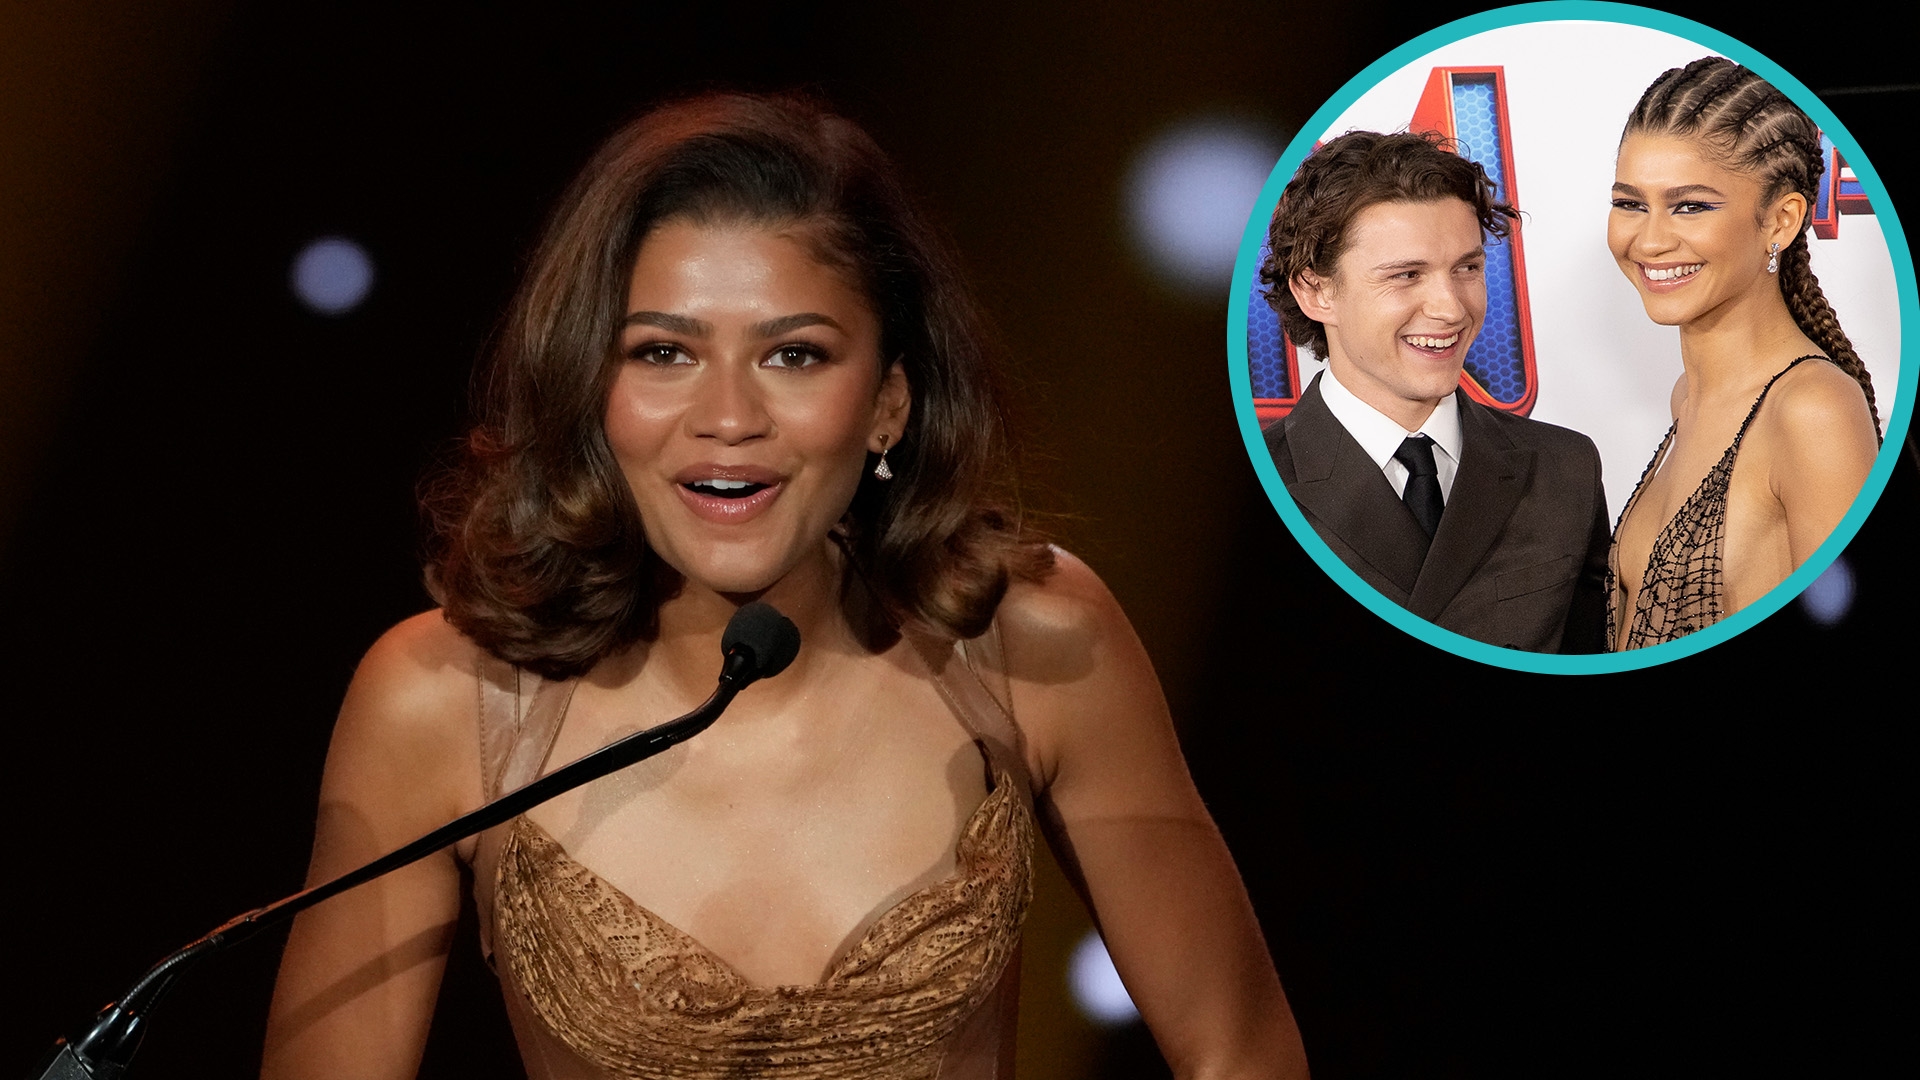 Zendaya and Tom Holland Were Told Not to Date by a 'Spider-Man